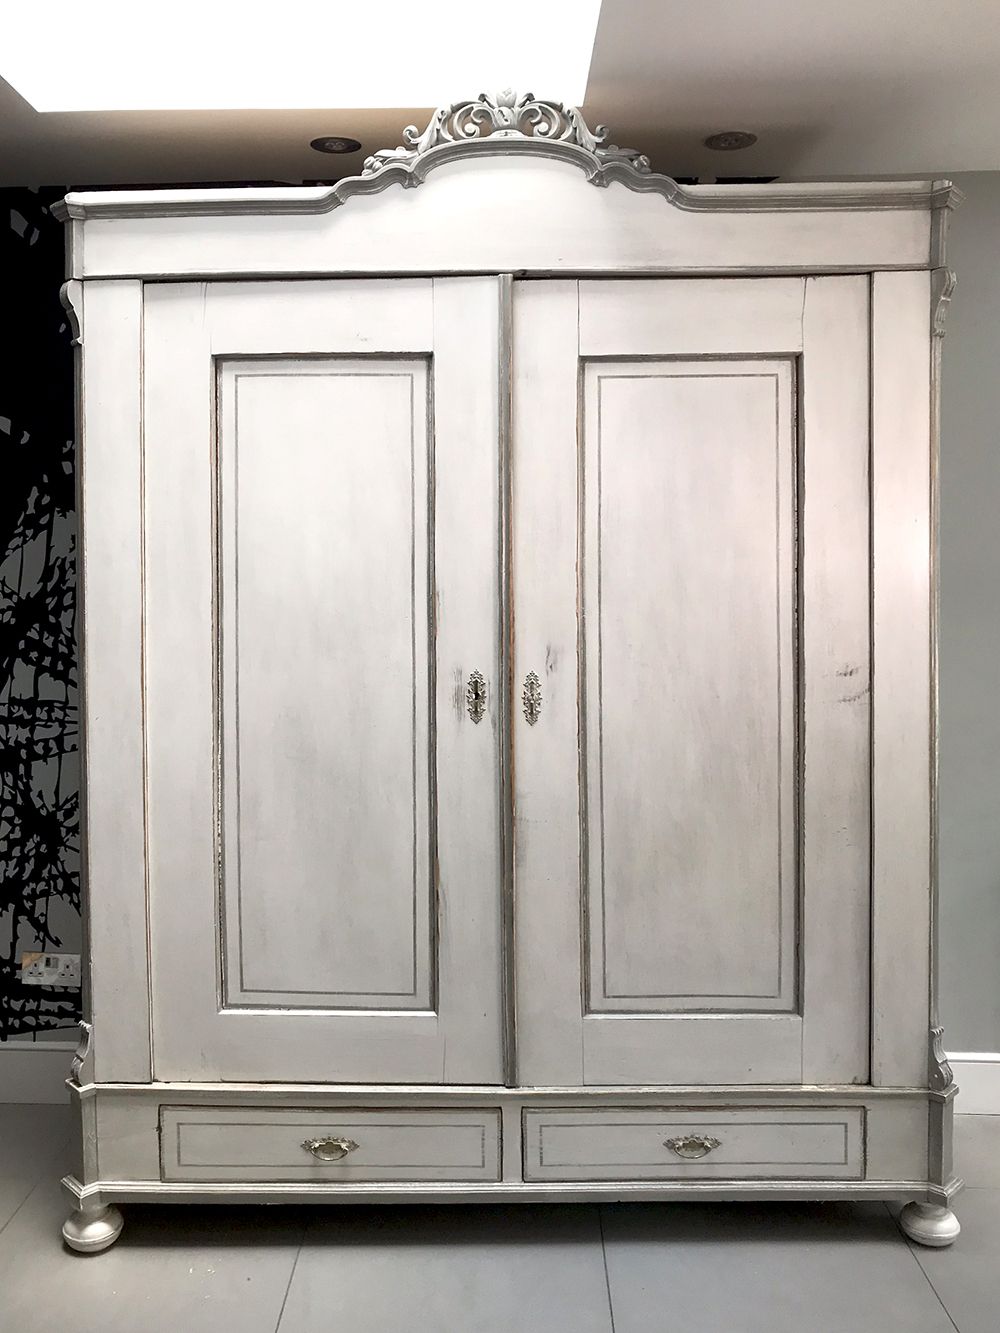 Antique French Painted Armoire – Sold | Napoleonrockefeller – Vintage And  Retro Furniture, Bespoke Hand Crafted Chairs And Seating Regarding Armoire French Wardrobes (View 5 of 20)